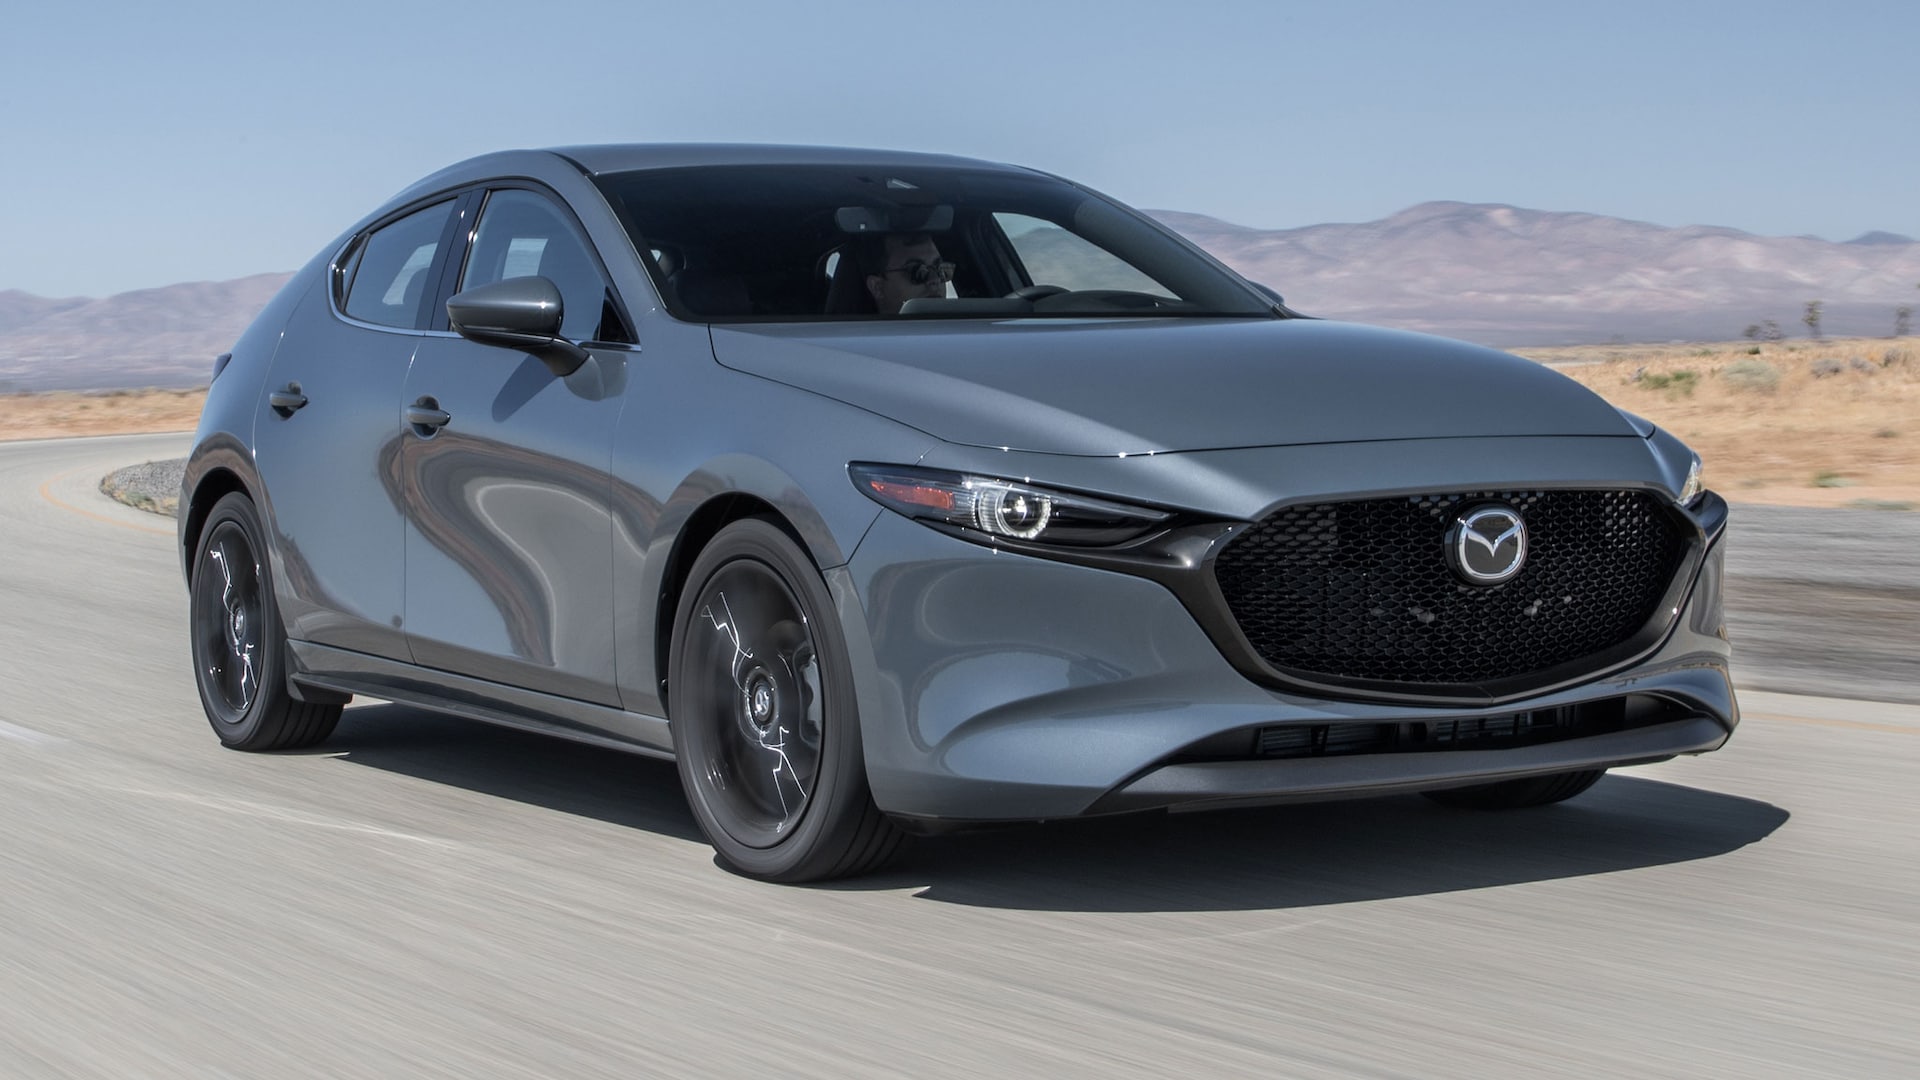 2020 Mazda 3 Long-Term Arrival: Kind of Grown-Up